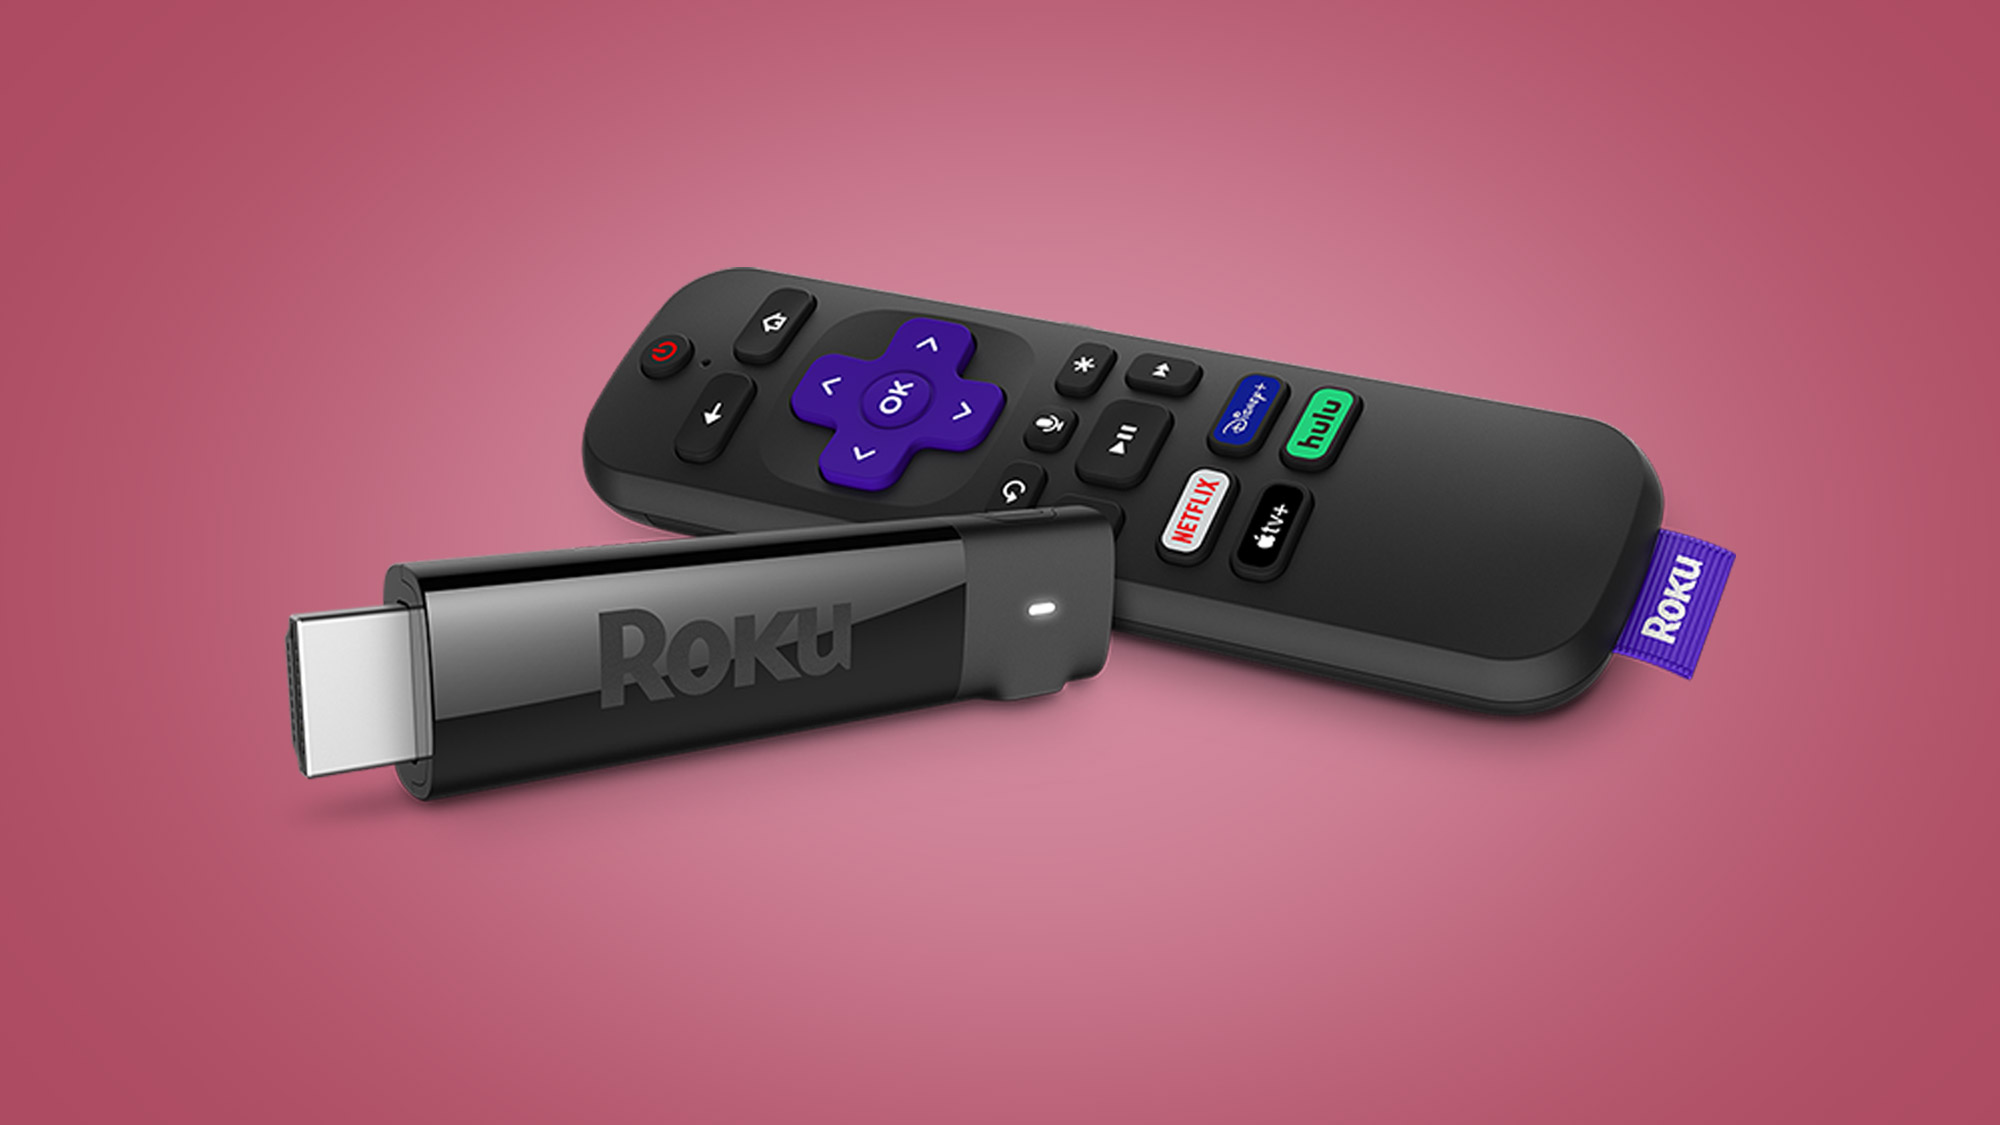 How To Troubleshoot "Roku Low Power: Insufficient Power" Issues?